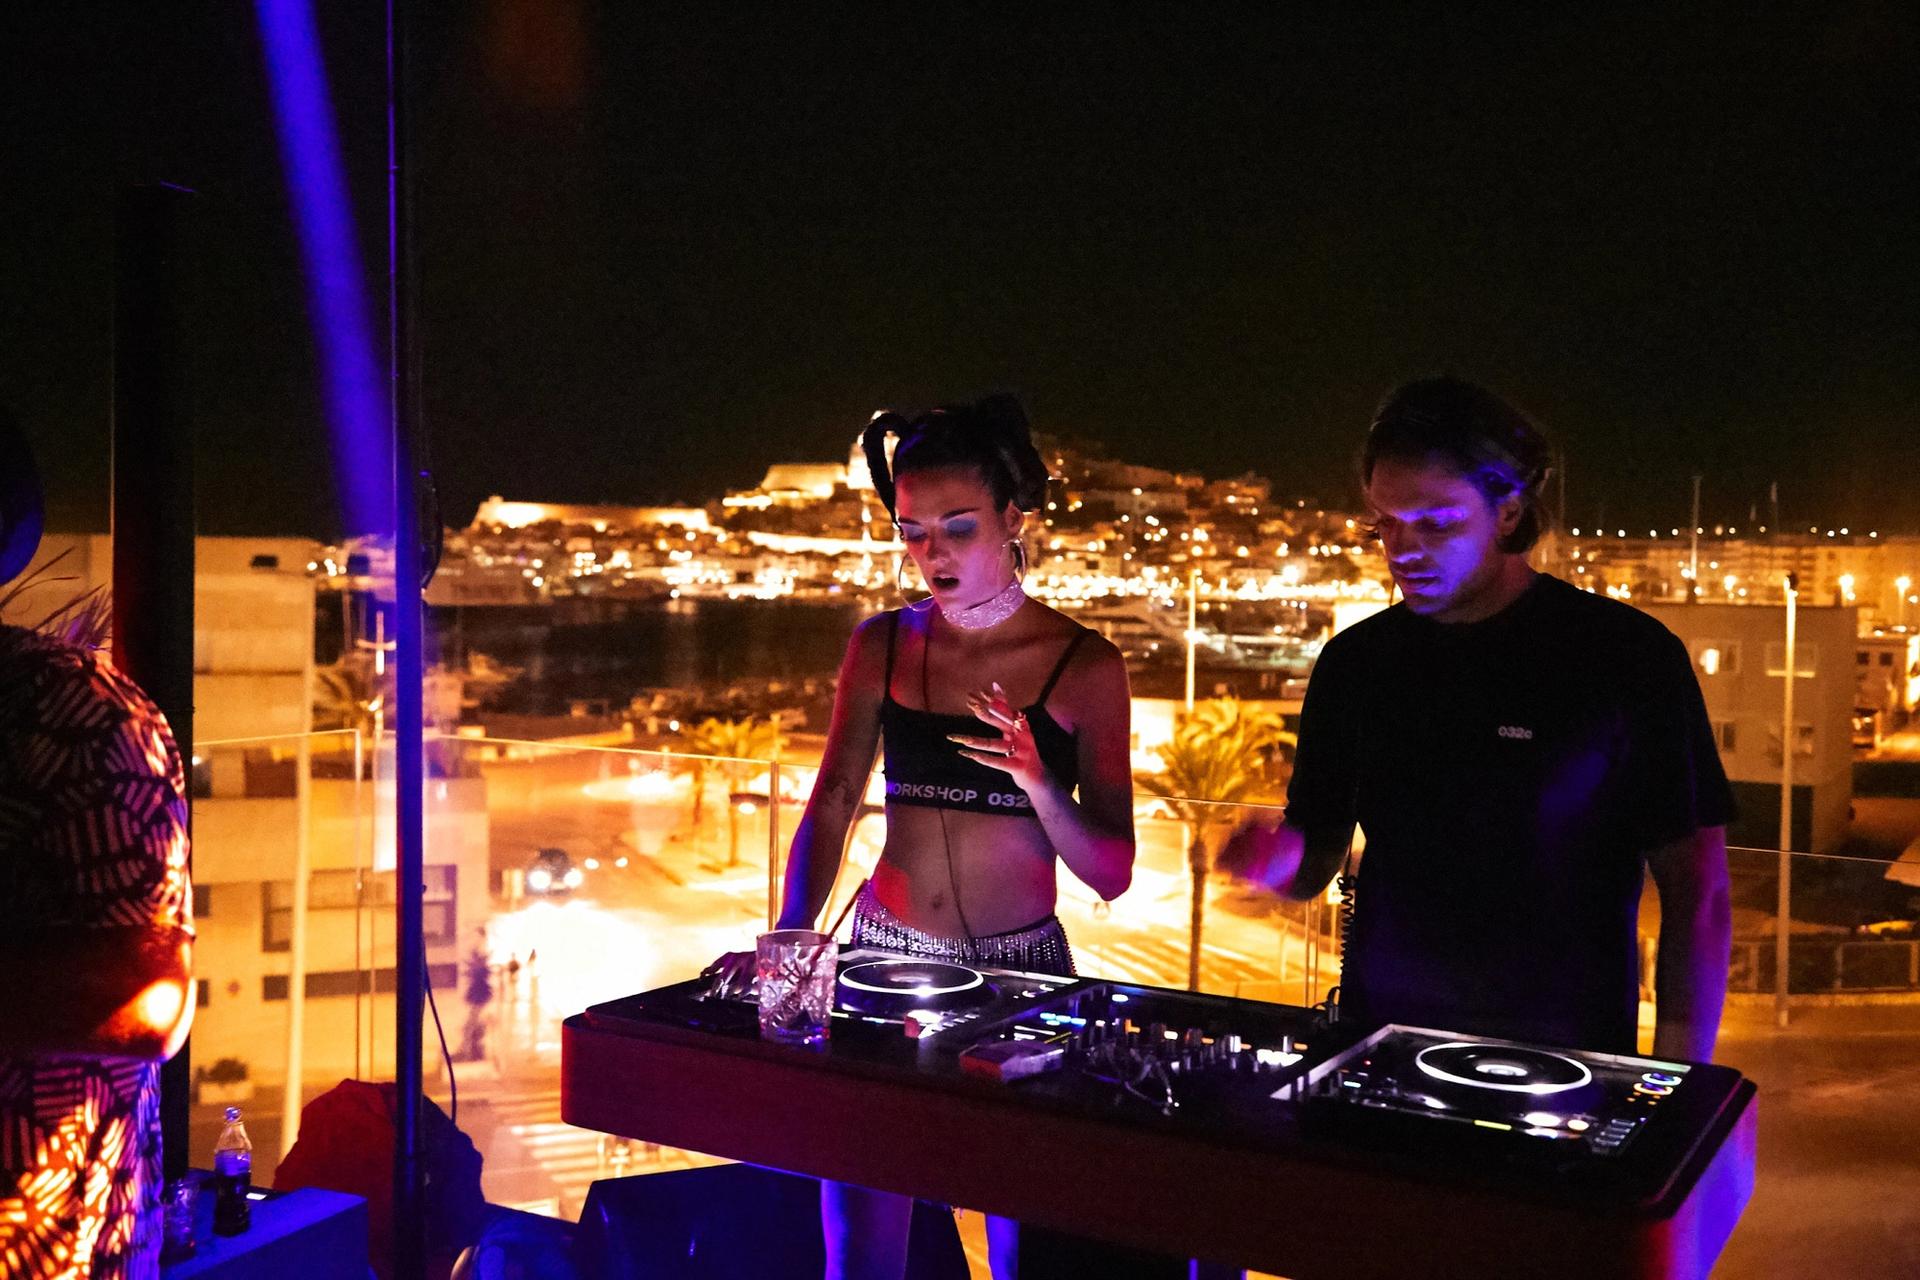 032c Classics Underwear Launch and Rooftop Party in Ibiza